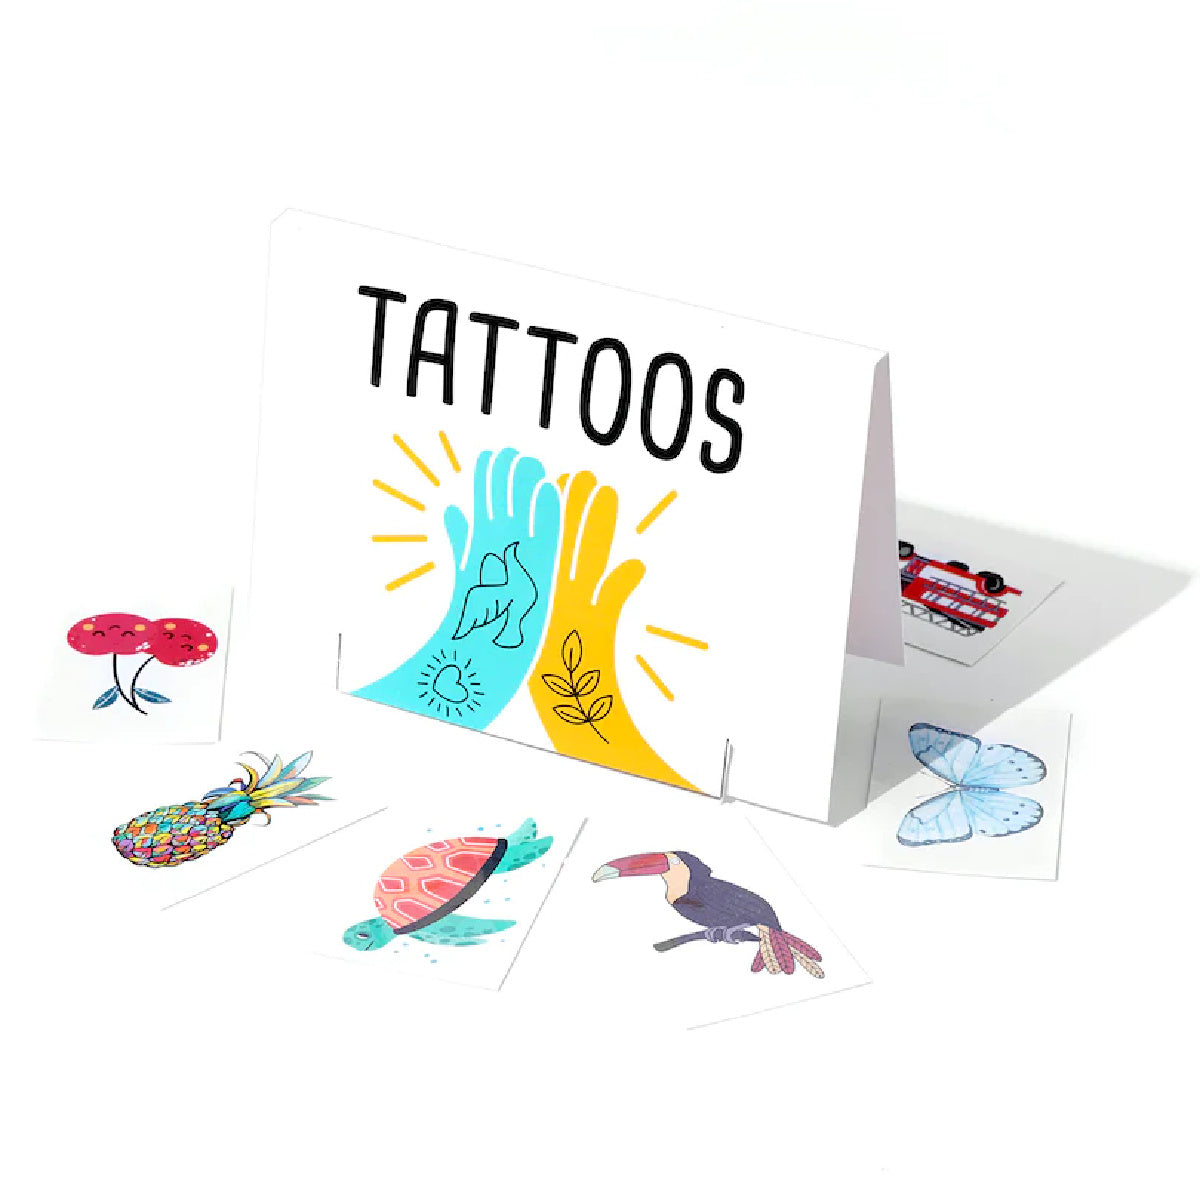 Party Pack of 100 various temporary tattoos for kids. Party favors.